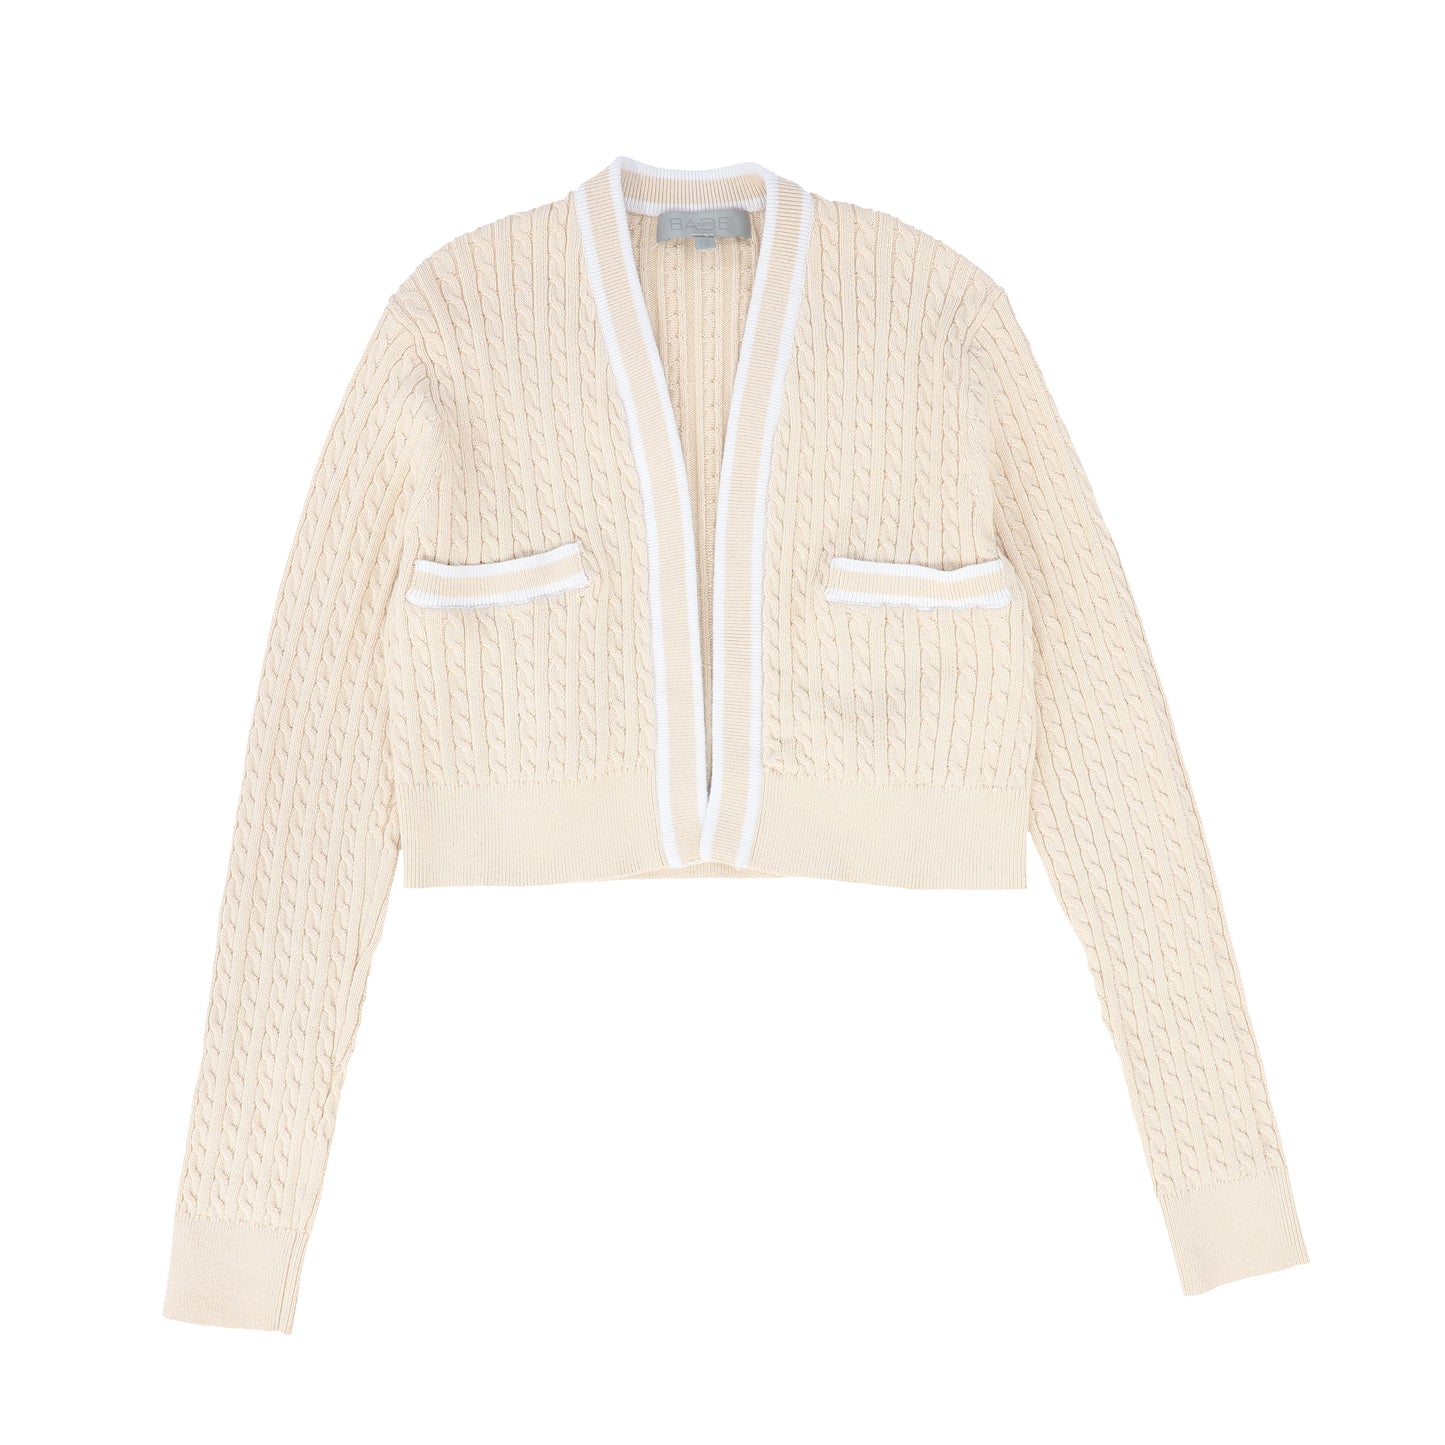 BACE COLLECTION NATURAL CABLE KNIT WHITE TRIM CARDIGAN [FINAL SALE]